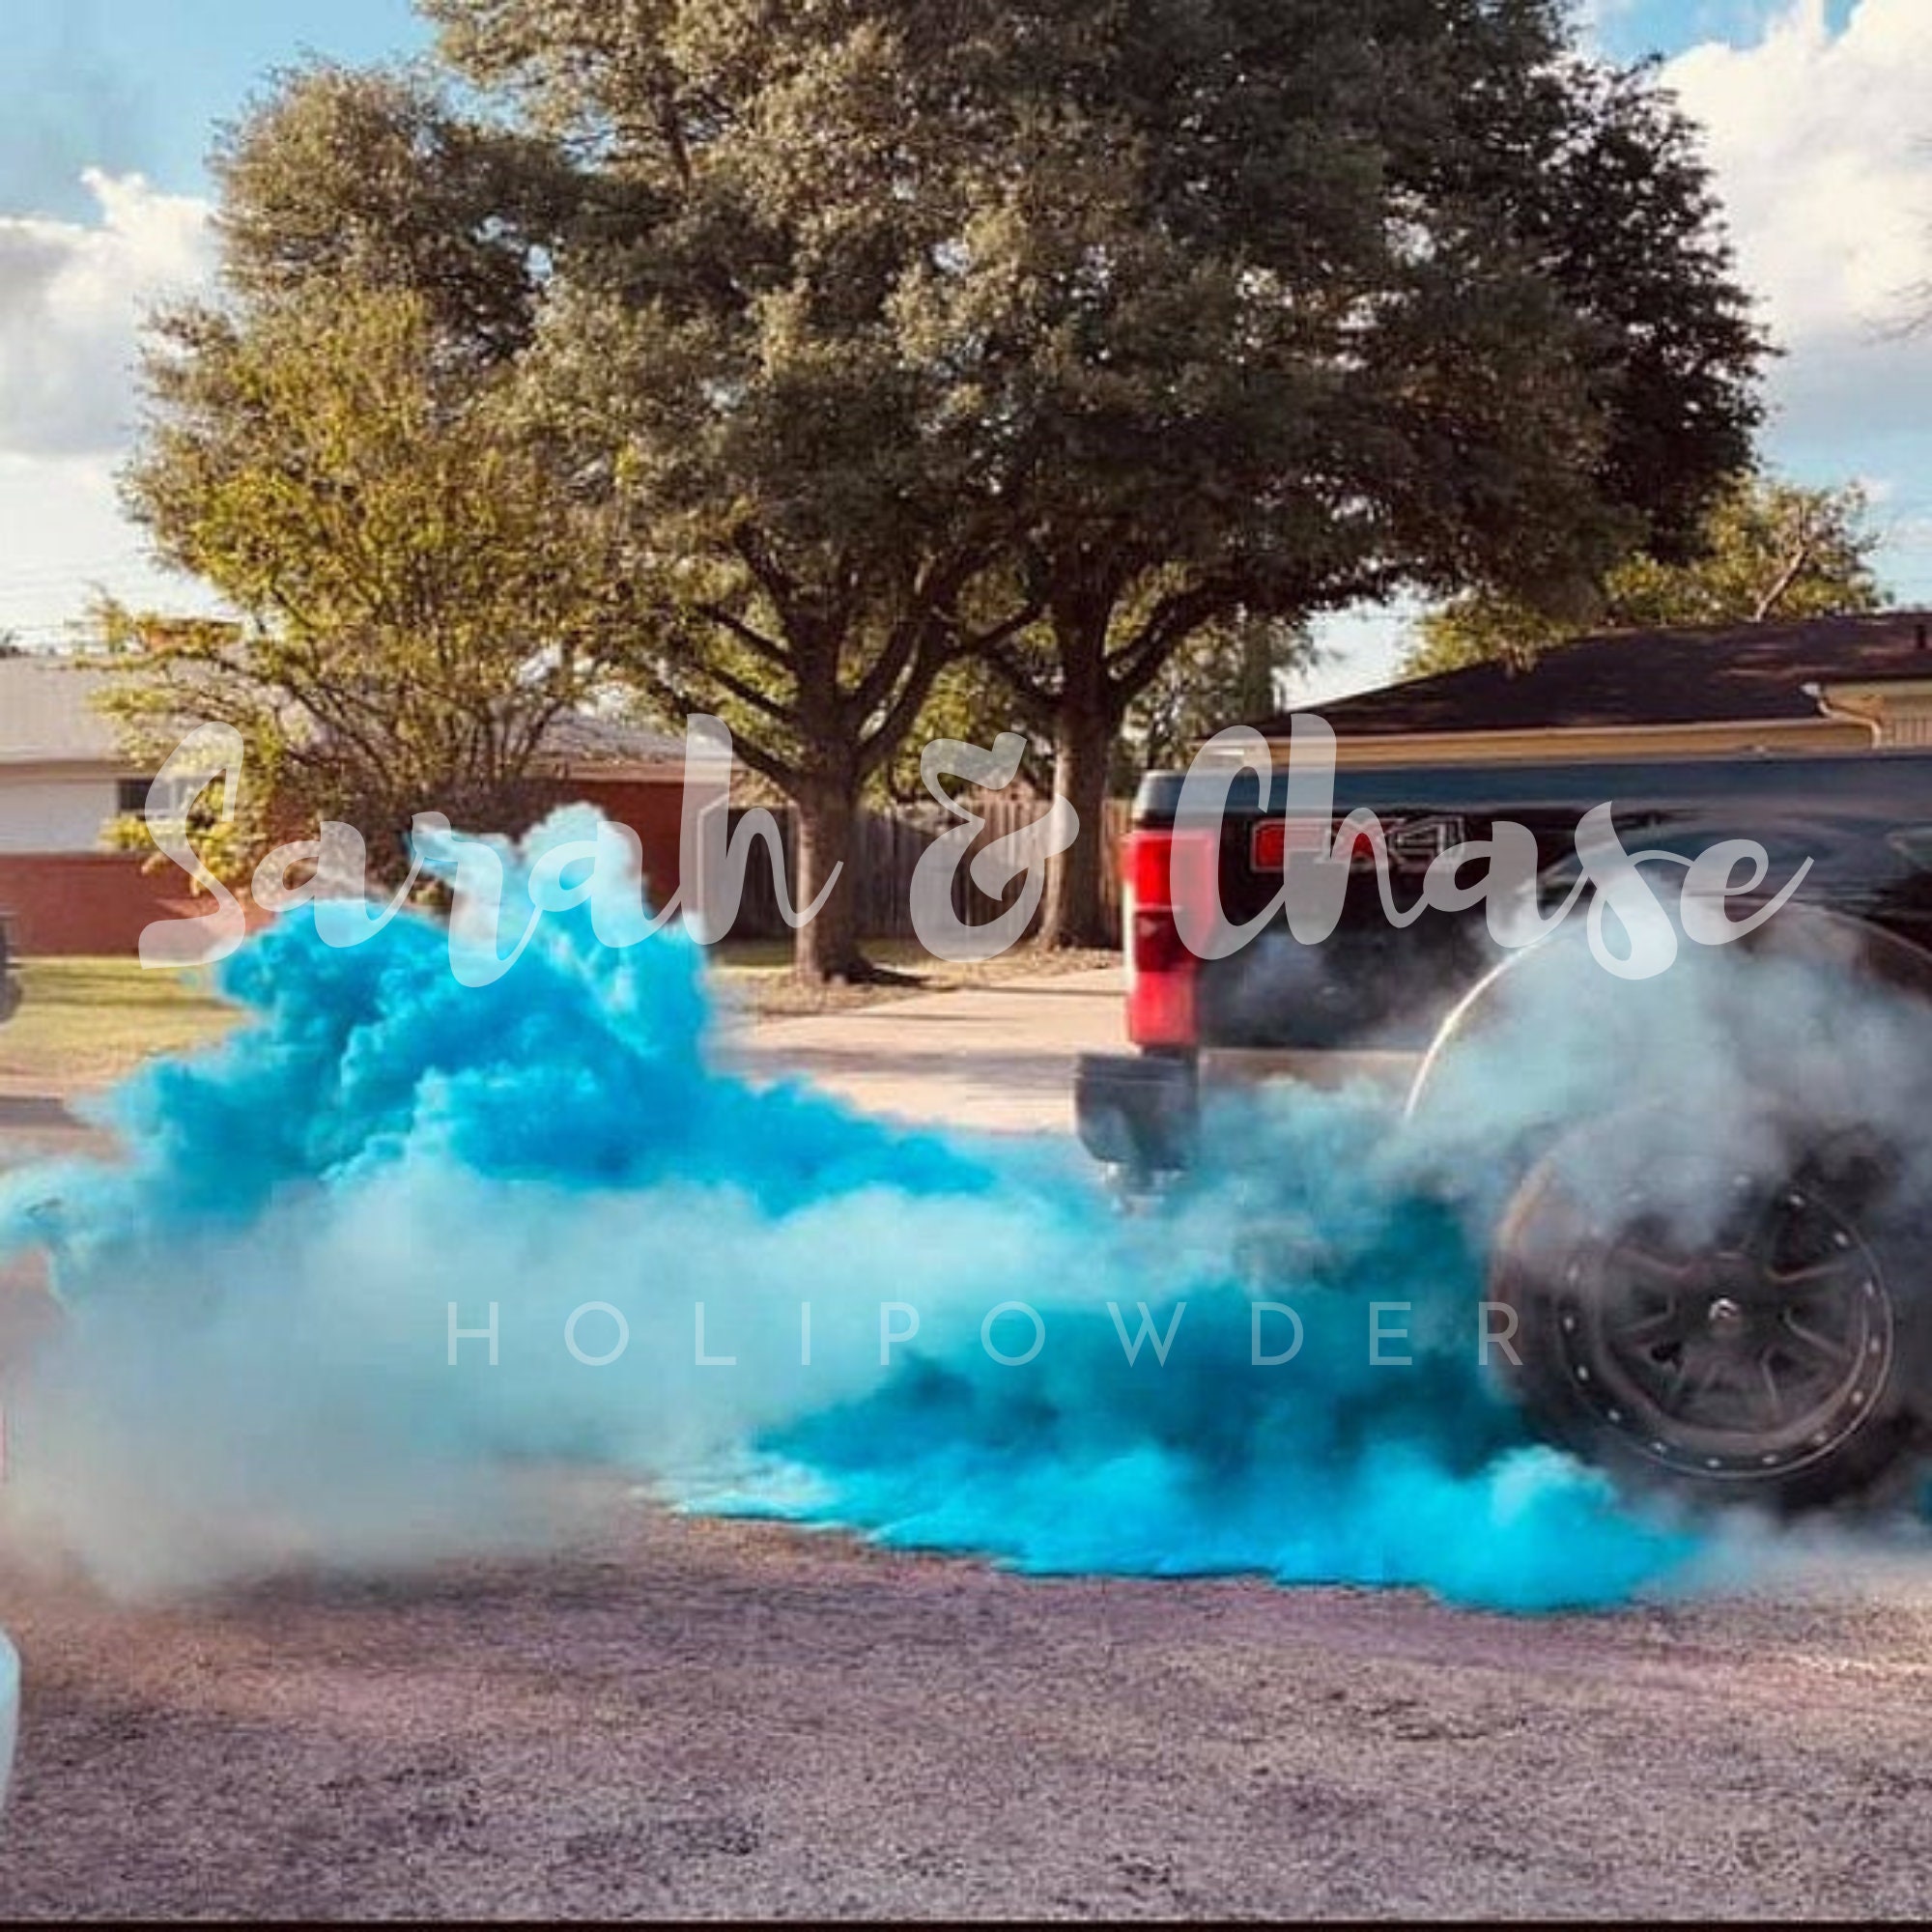 GENDER REVEAL BURNOUT With Colored Smoke Tires 